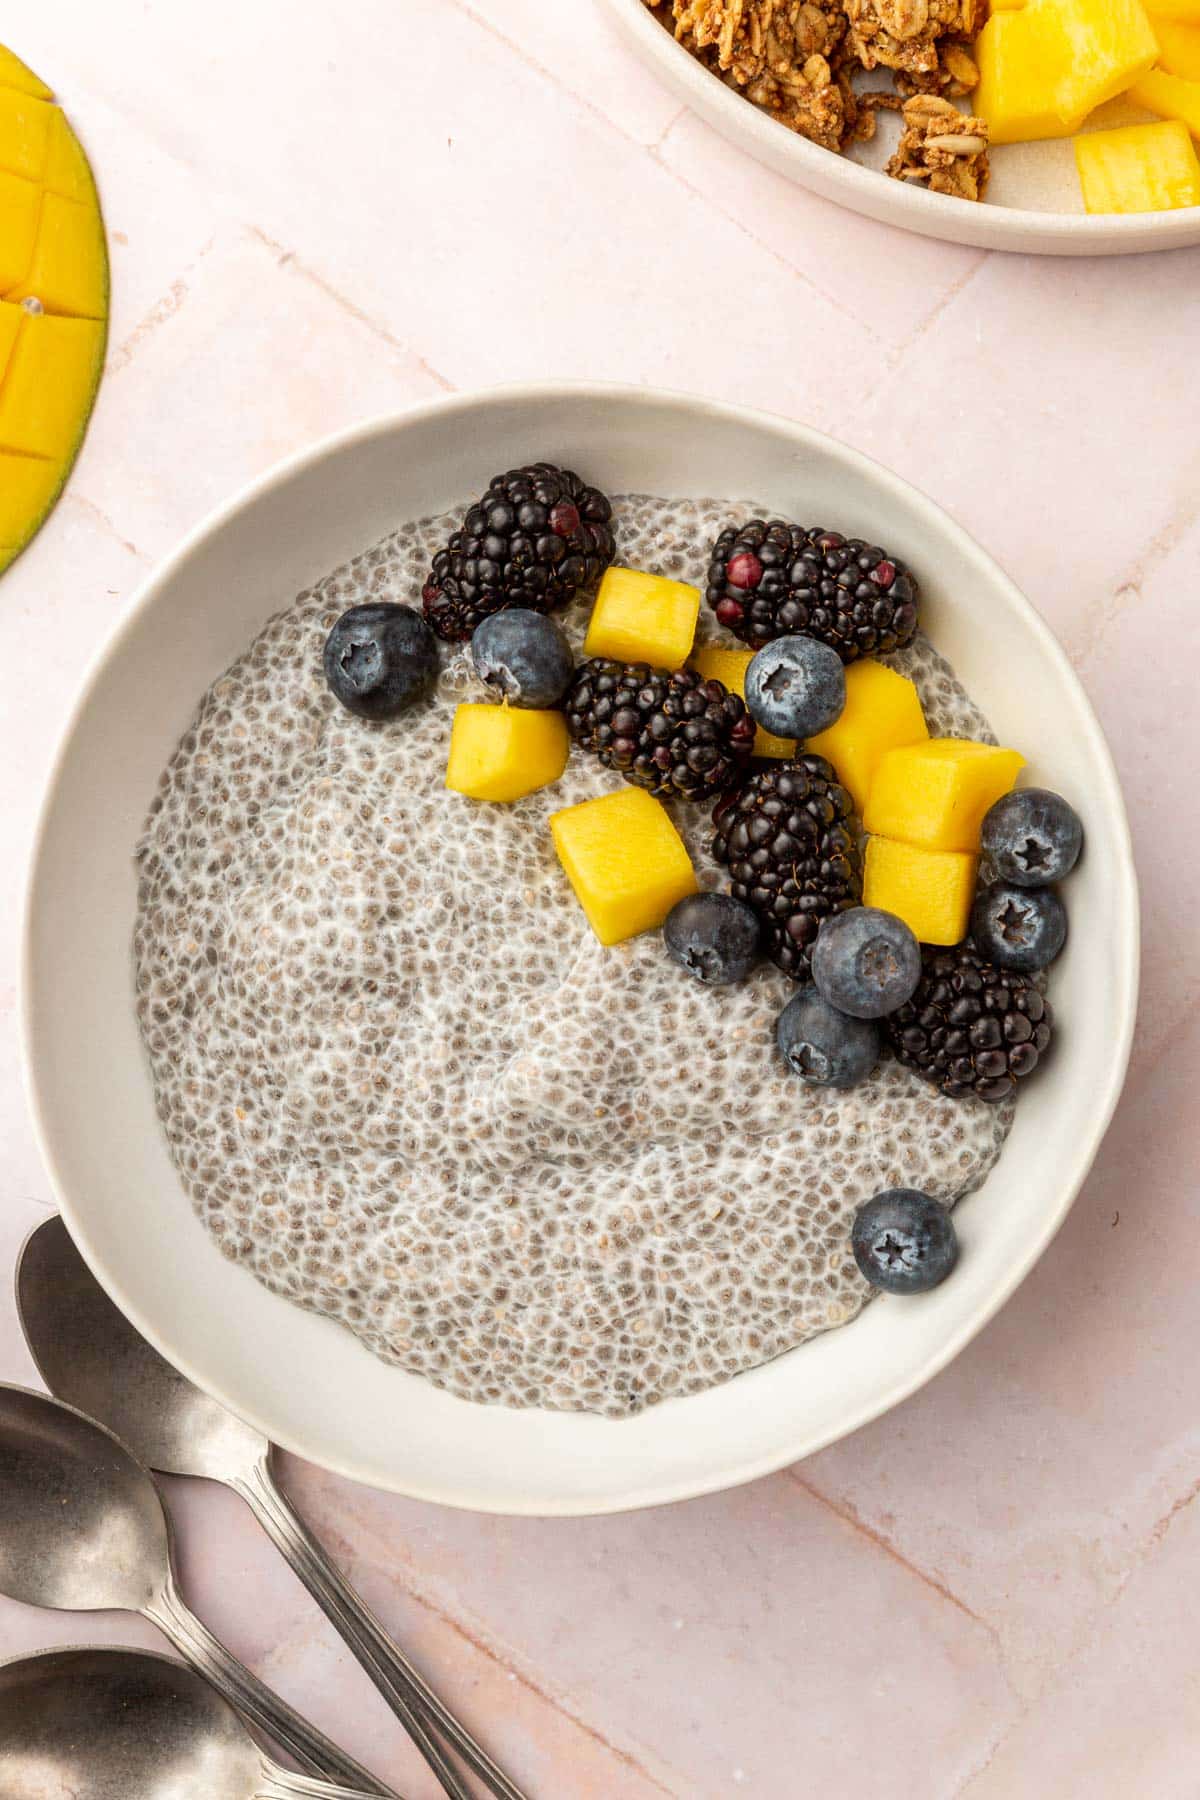 A bowl of chia pudding topped with diced mango, blueberries, blackberries, and gluten-free granola with two spoons on the side.